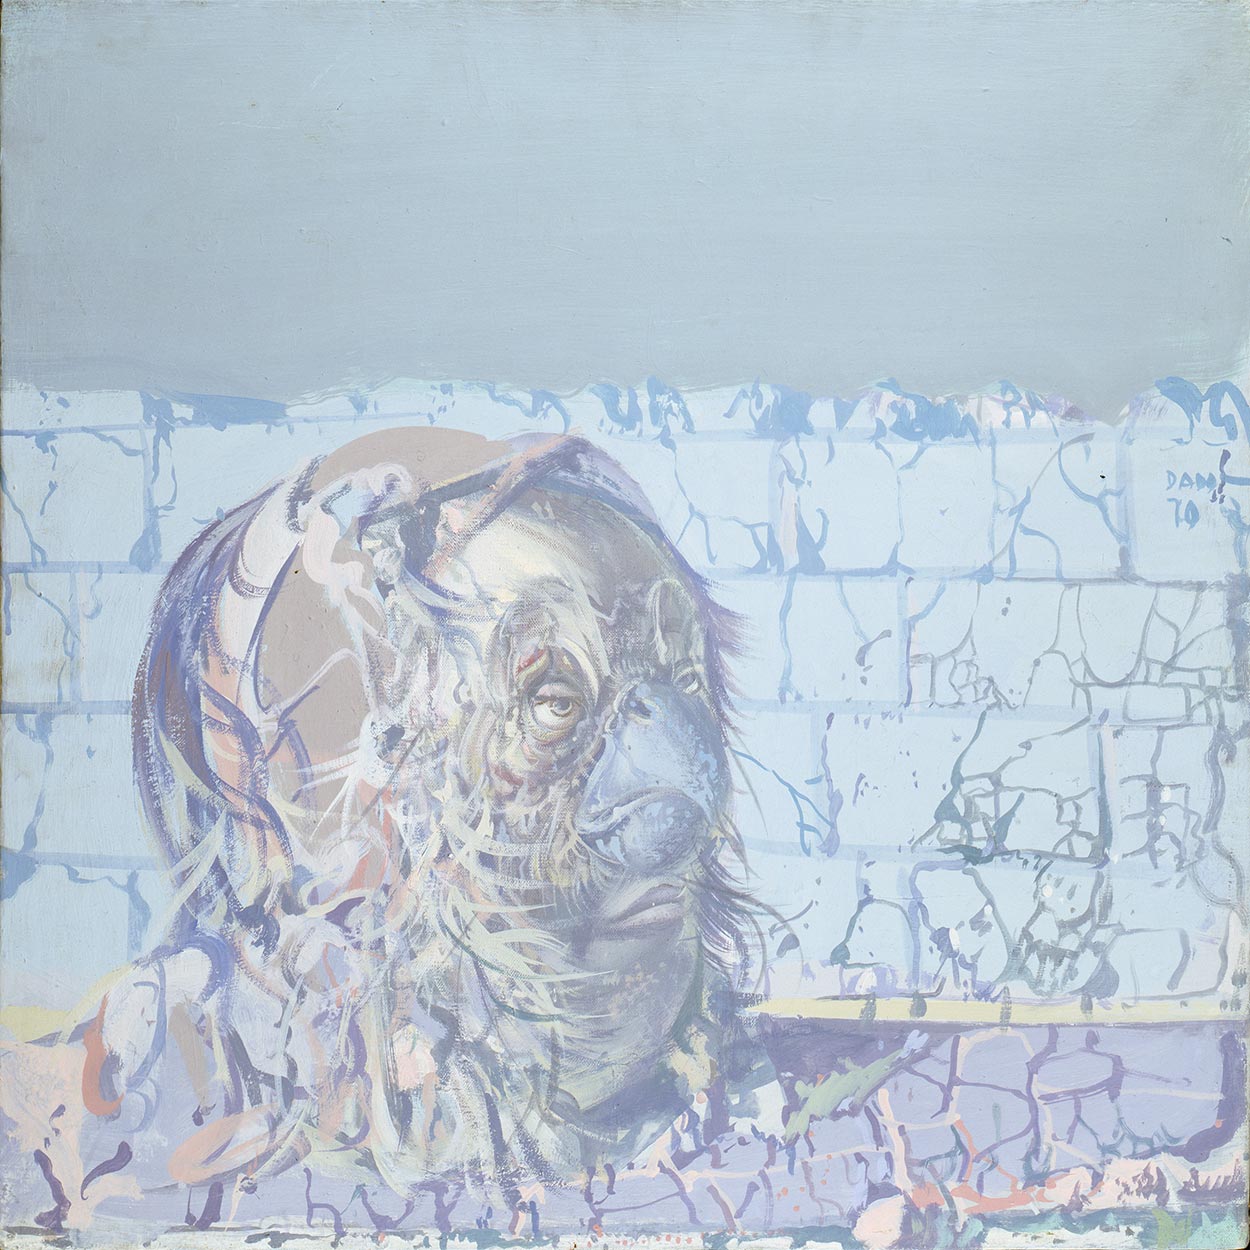 Dado’s painting: The Gallery of Ancestors, 1970